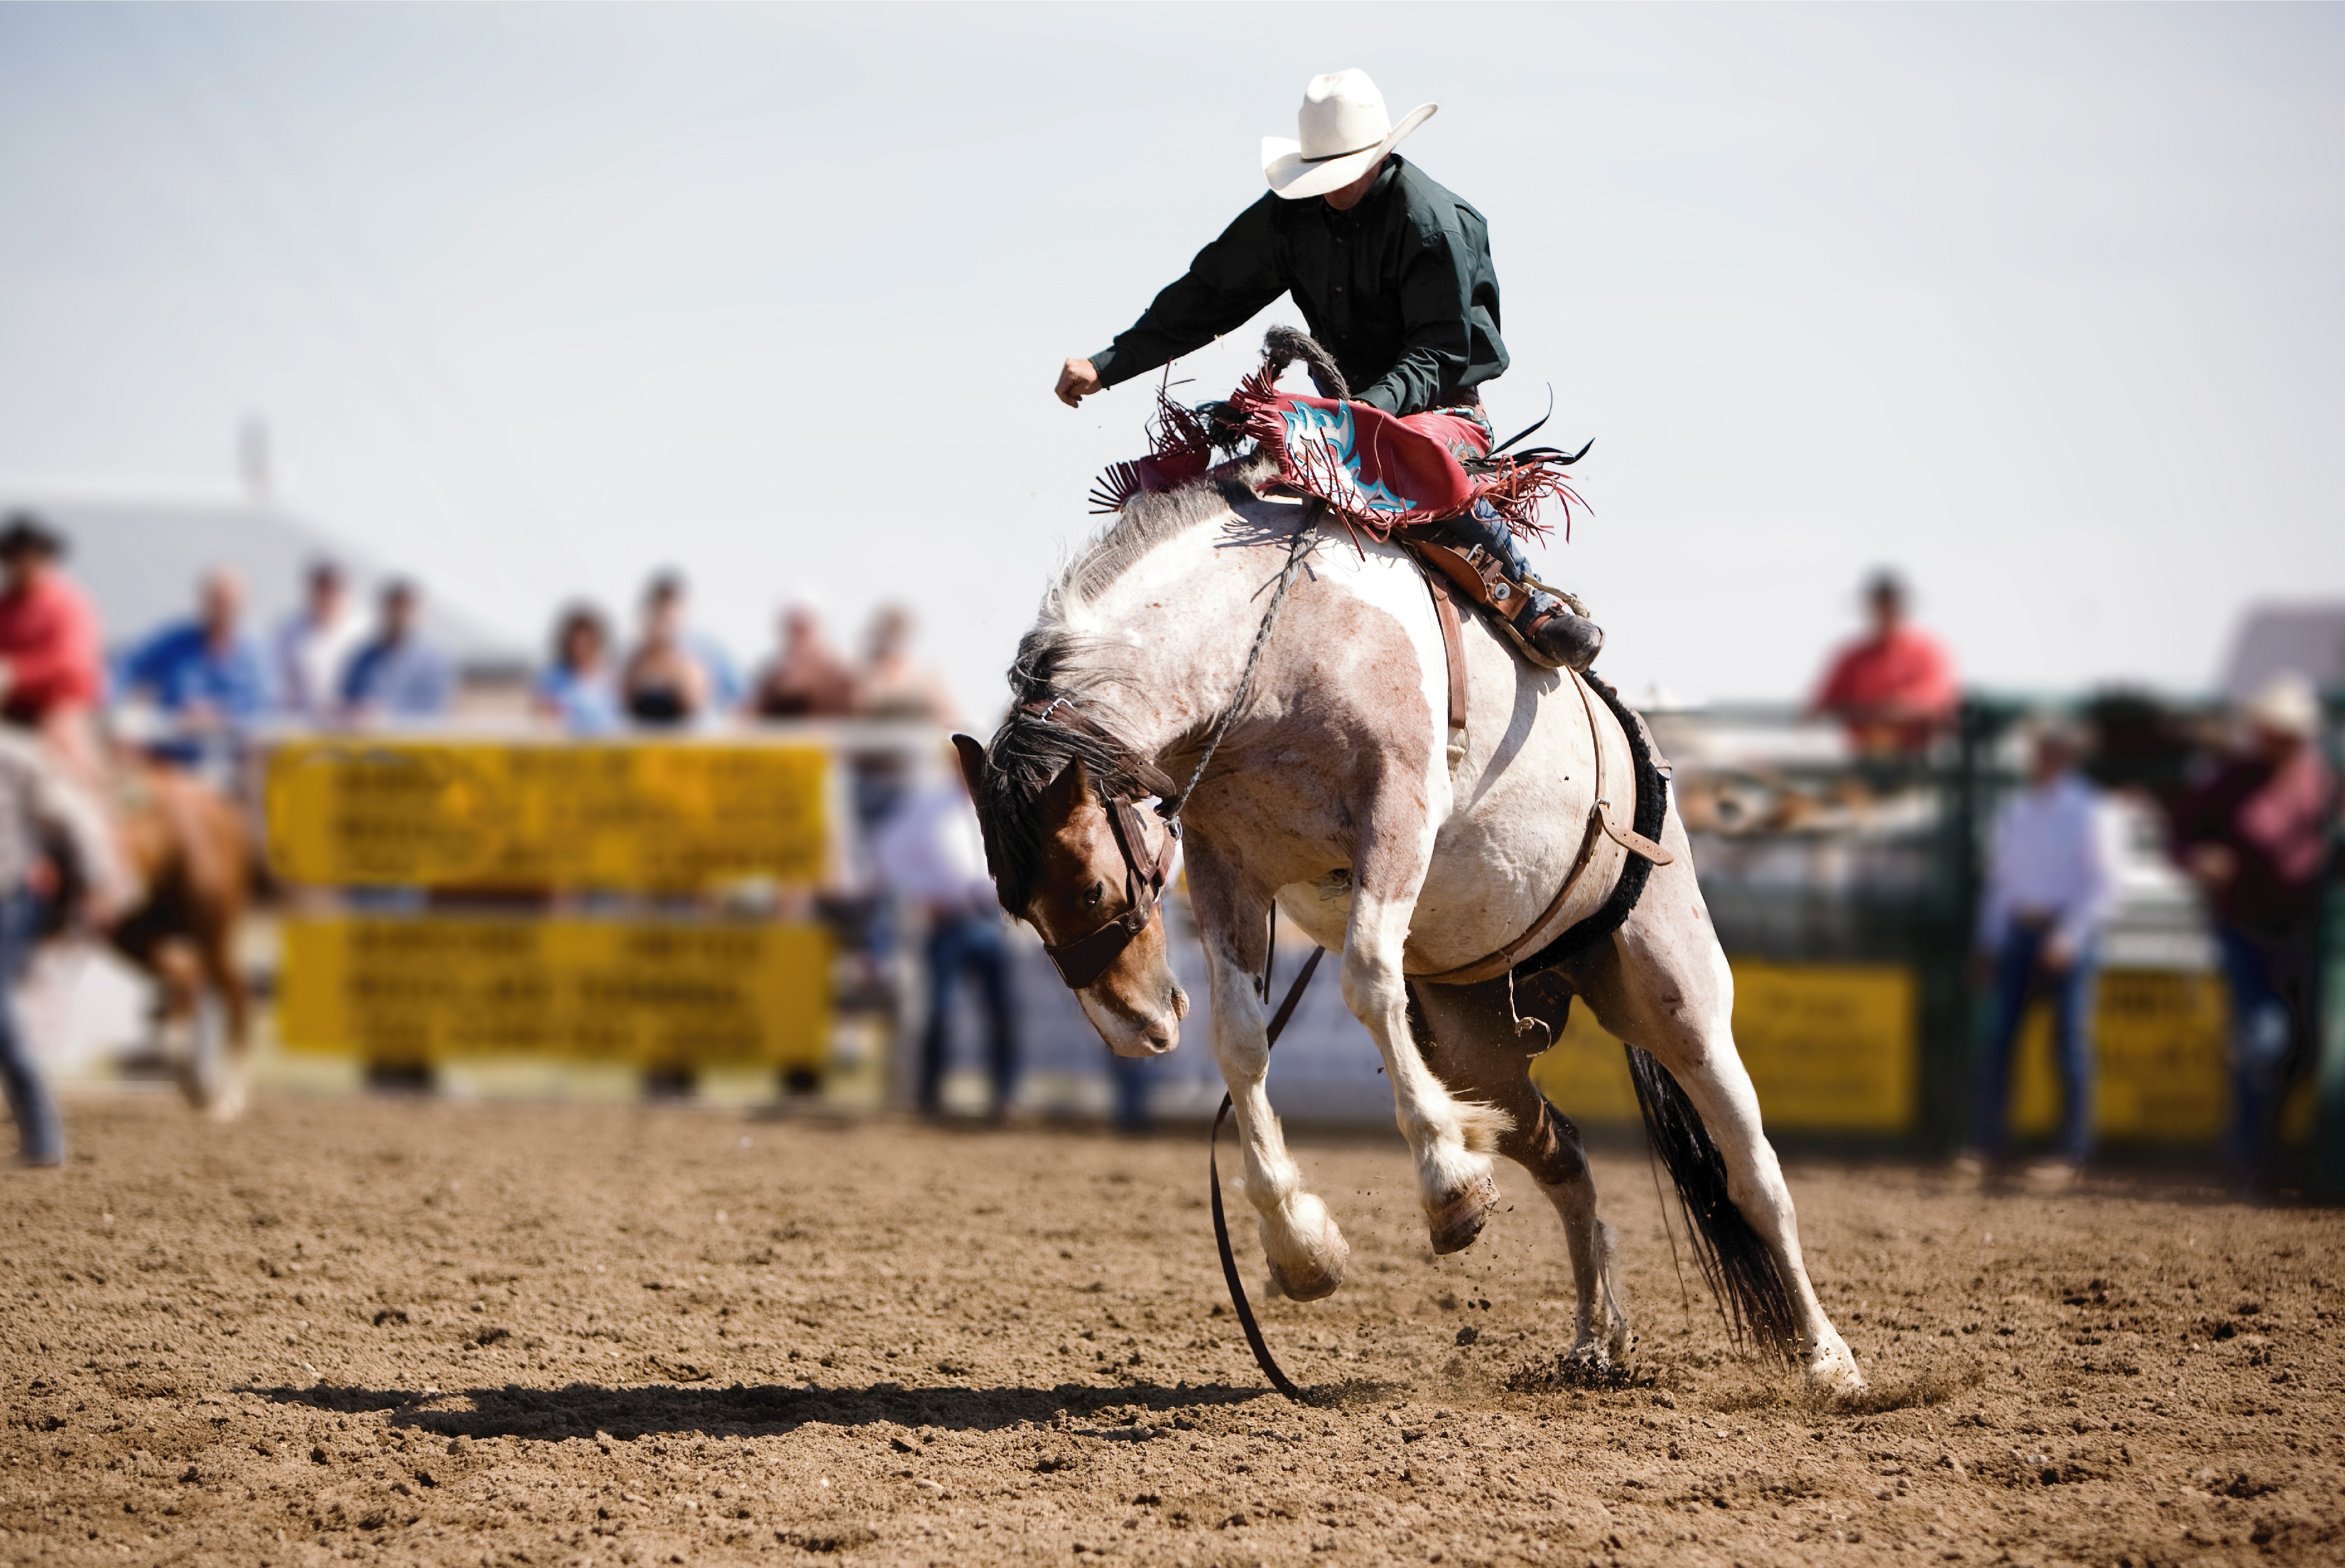 cowboy rides a horse in a rodeo in Montana